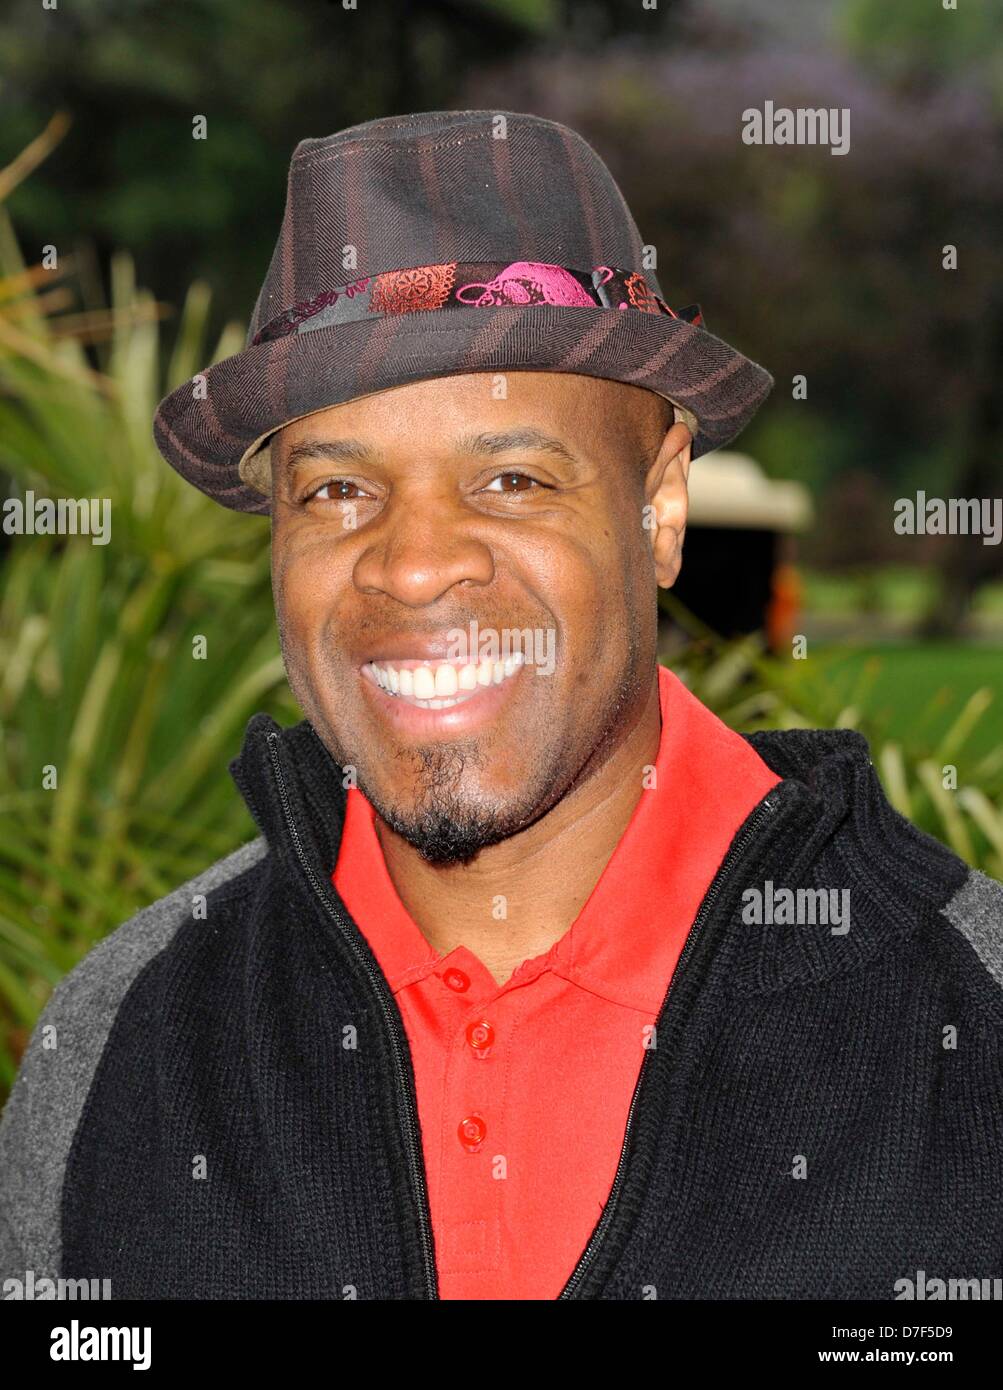 Toluca Lake, California, USA. 6th May 2013. Michael Bearden in attendance for The 6th Annual George Lopez Celebrity Golf Classic To Benefit The Lopez Foundation, Lakeside Golf Club, Toluca Lake, CA May 6, 2013. Photo By: Dee Cercone/Everett Collection/Alamy Live News Stock Photo